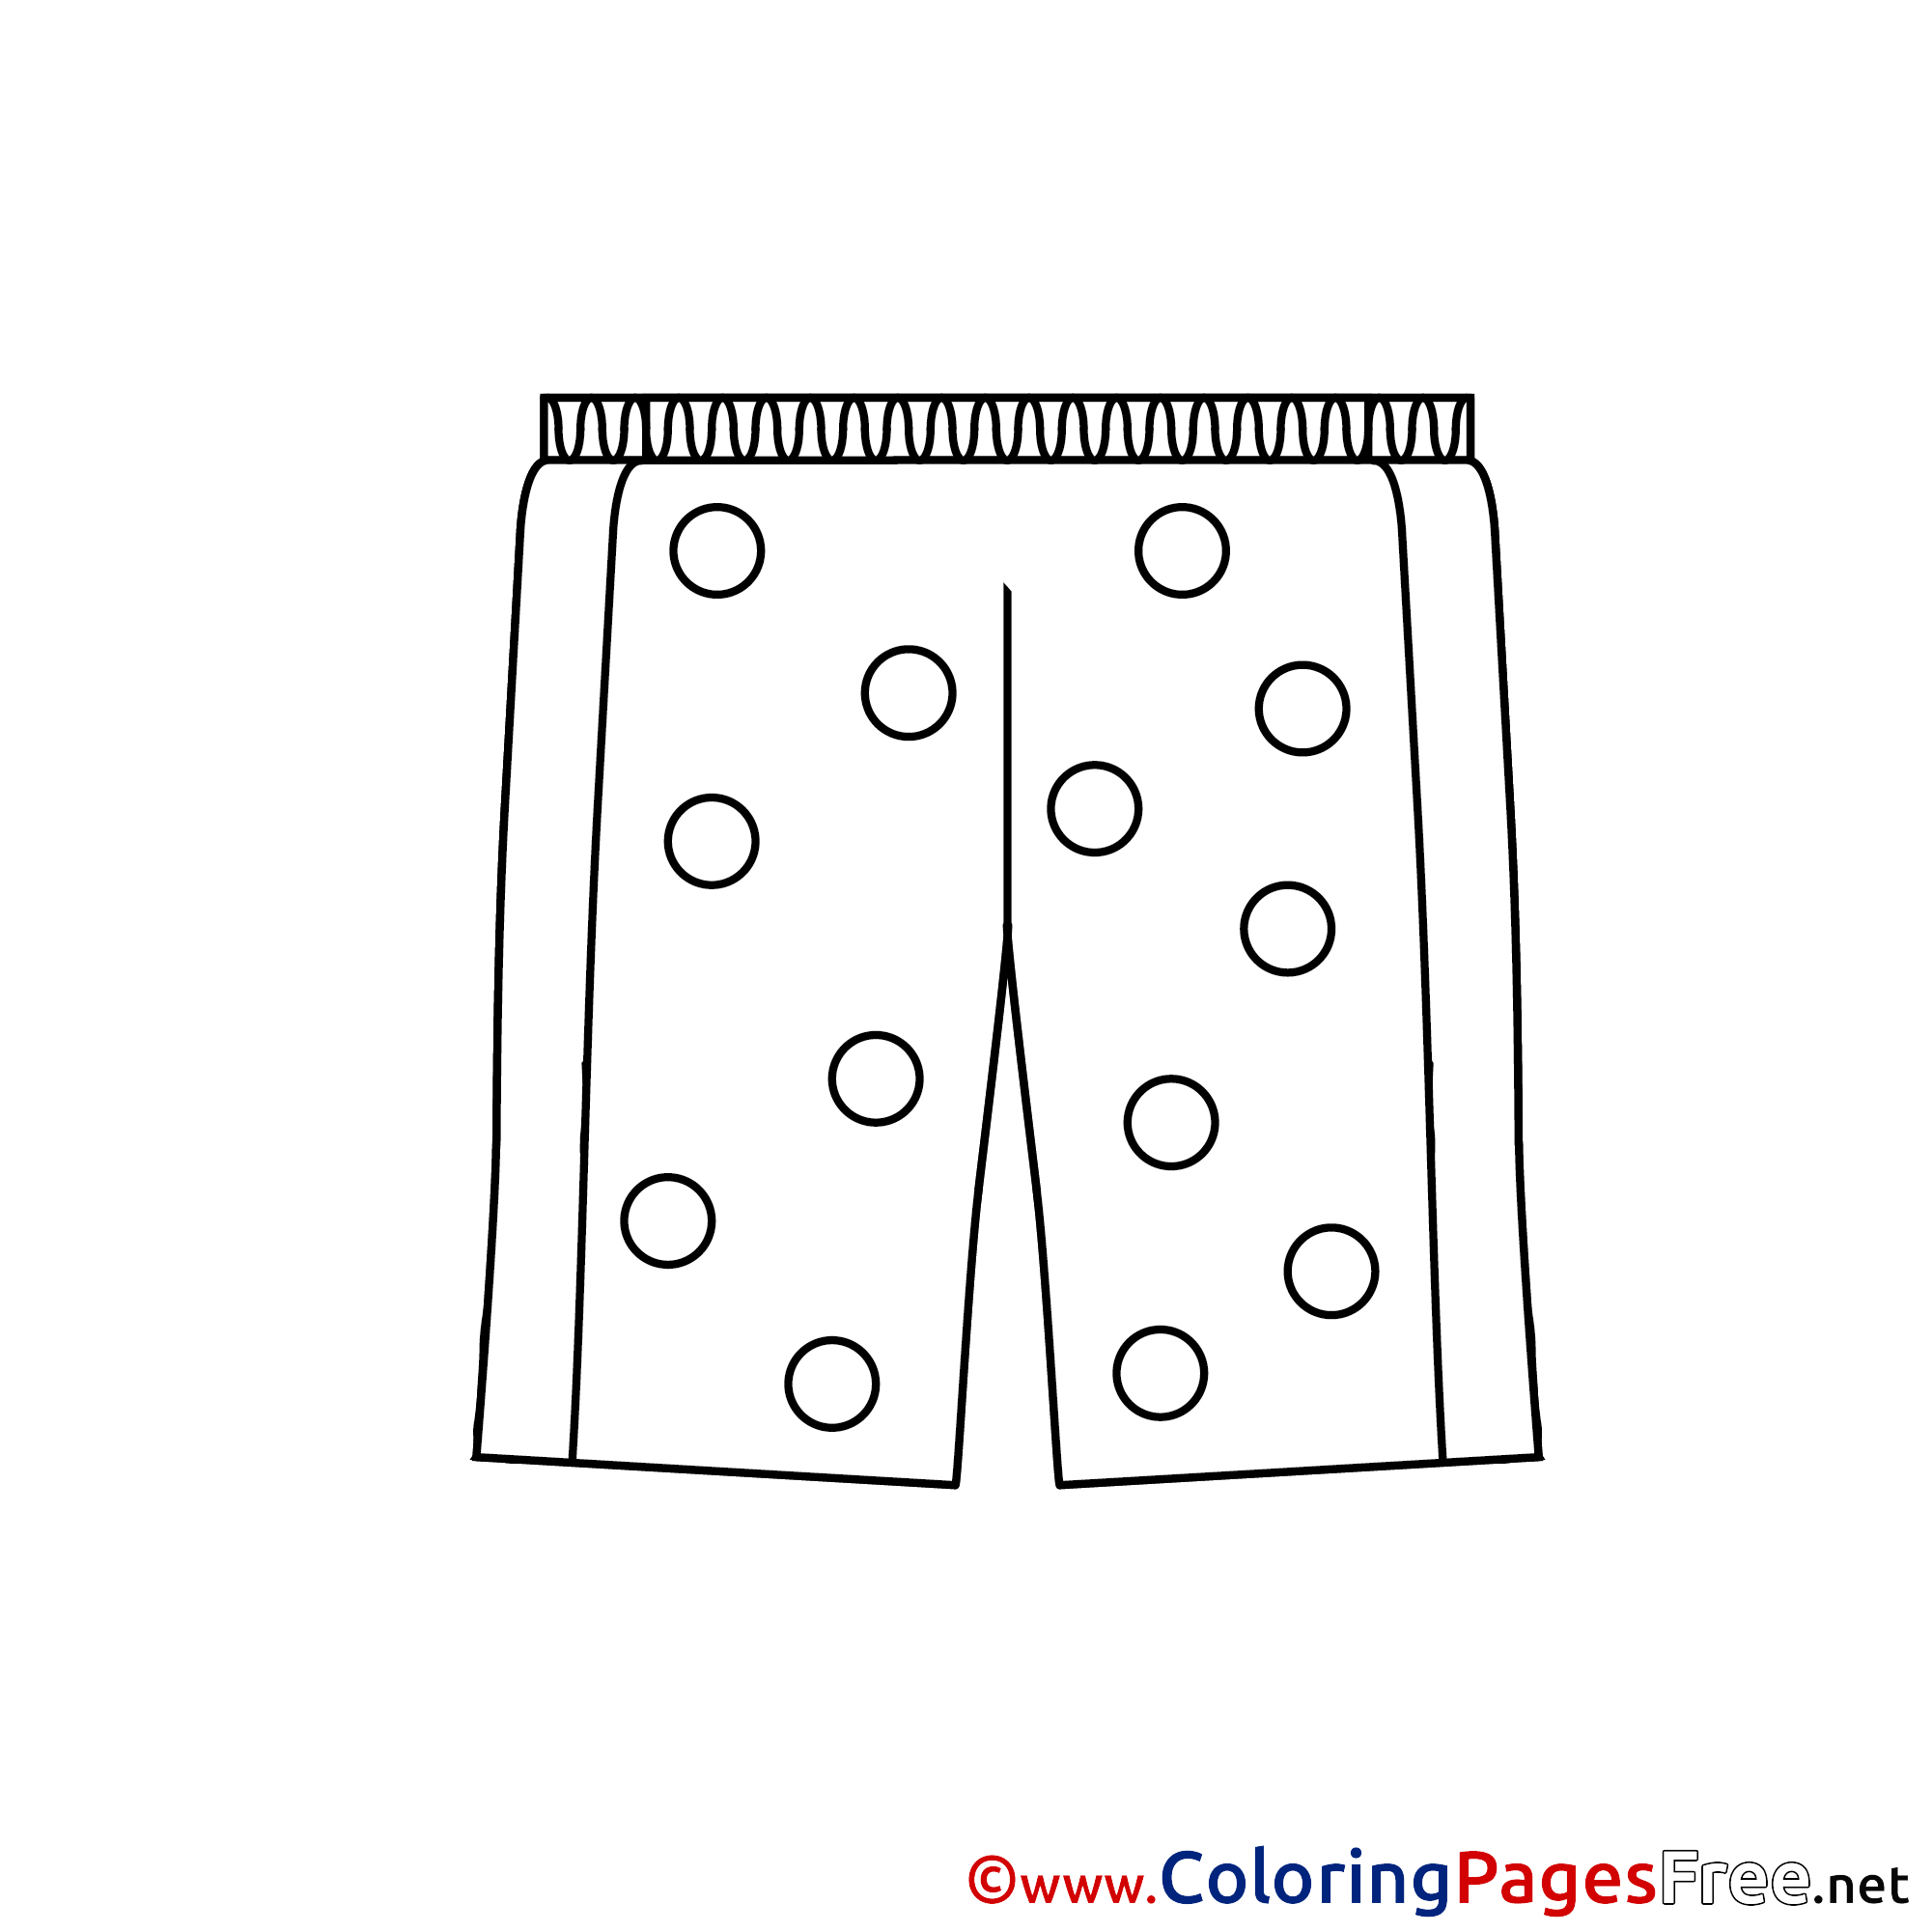 Simple coloring page coloring book for children Vector Image